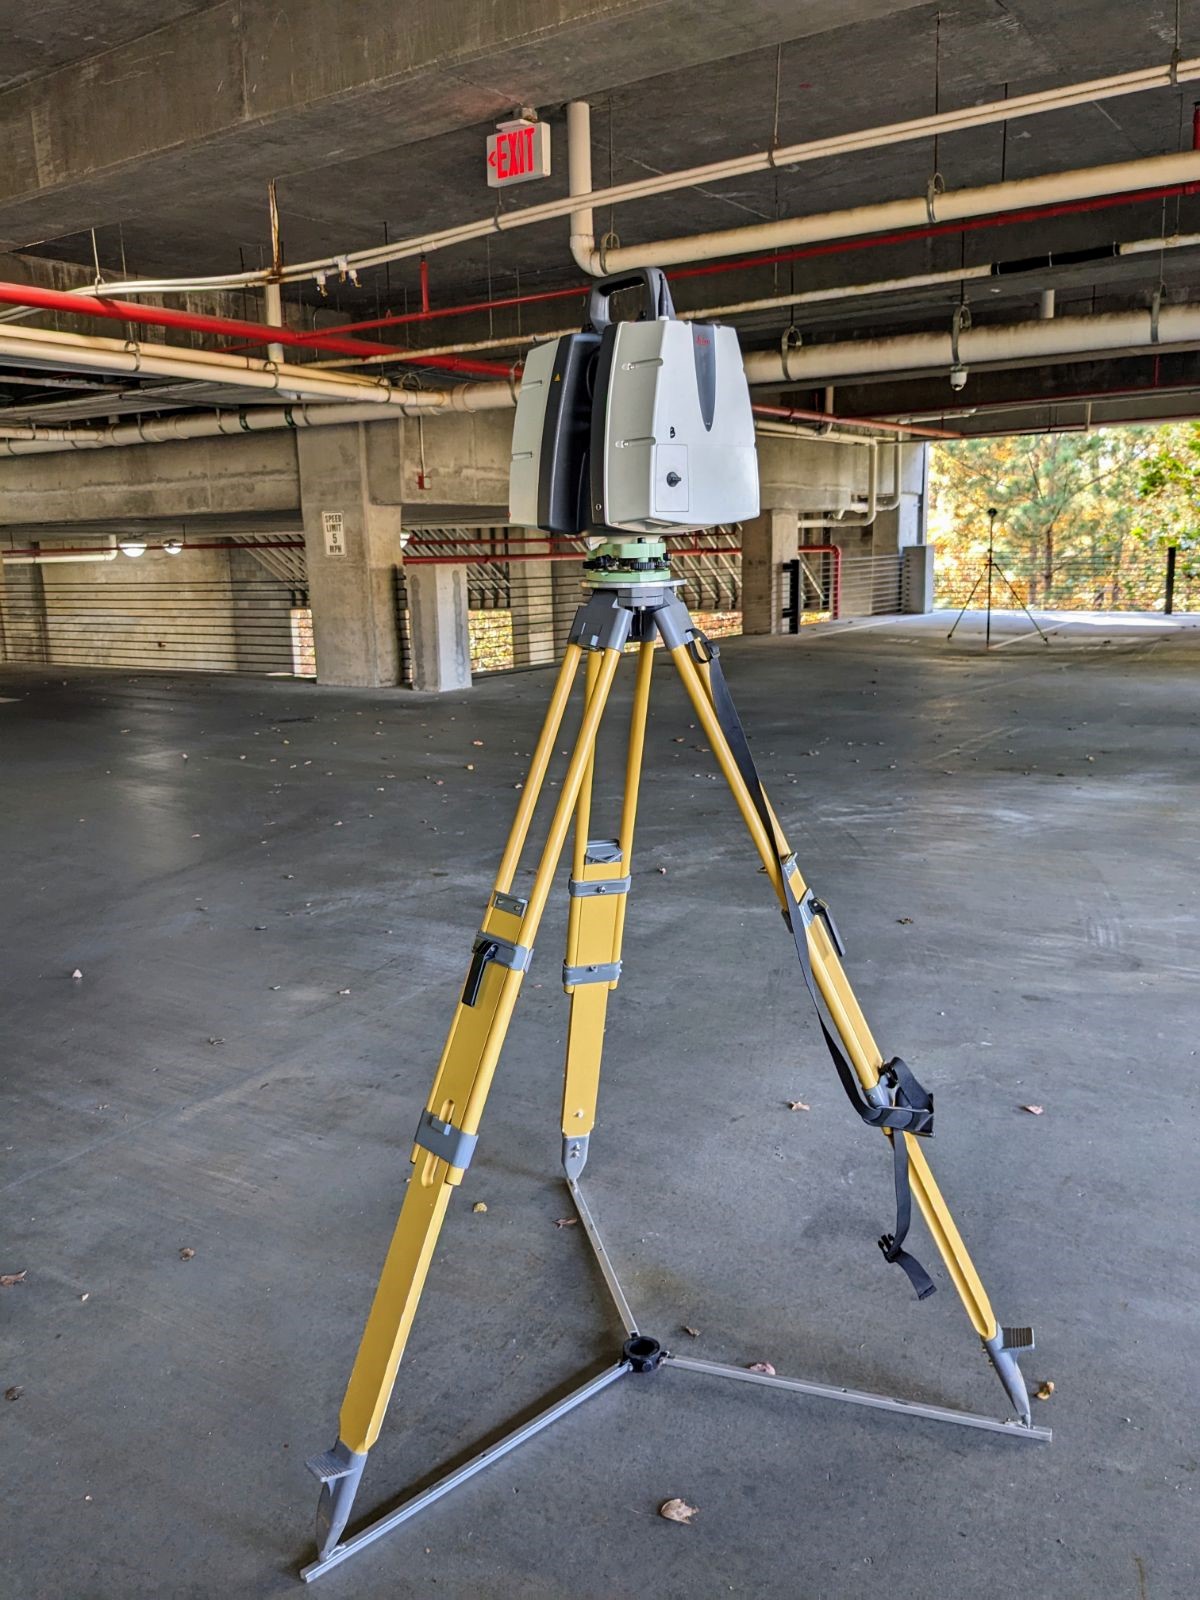 A closeup of a survey mapping camera on a tripod sitting inside an empty concrete building.